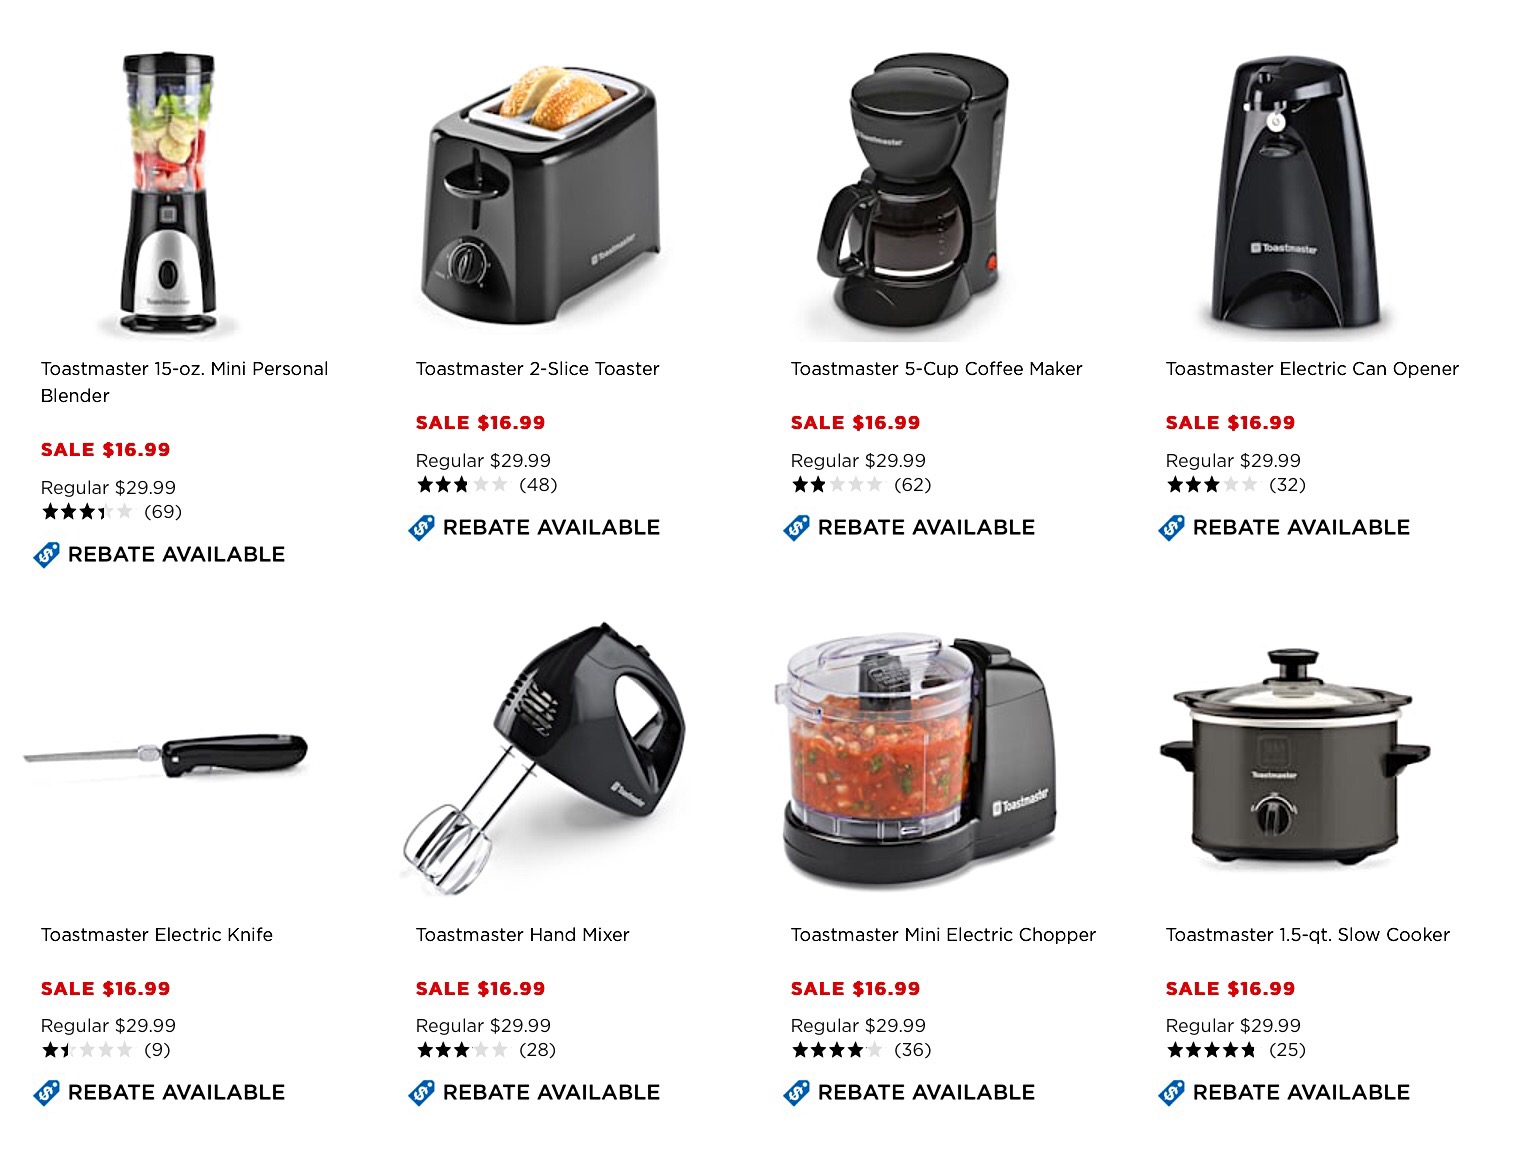 kohl-s-toastmaster-small-kitchen-appliances-4-99-each-after-rebate